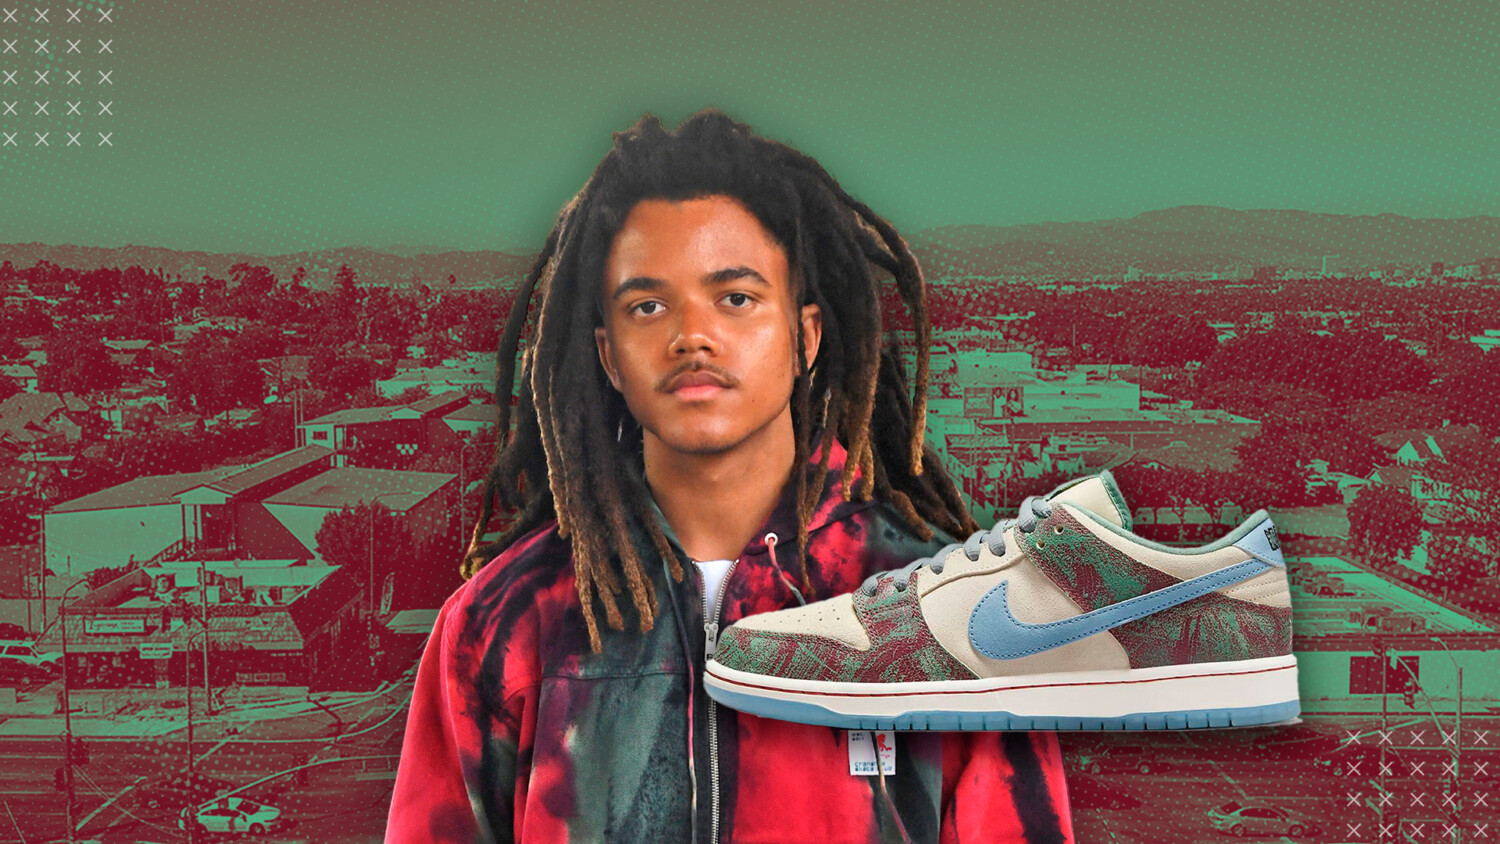 The 17 Best Nike Collaborations To Buy Now